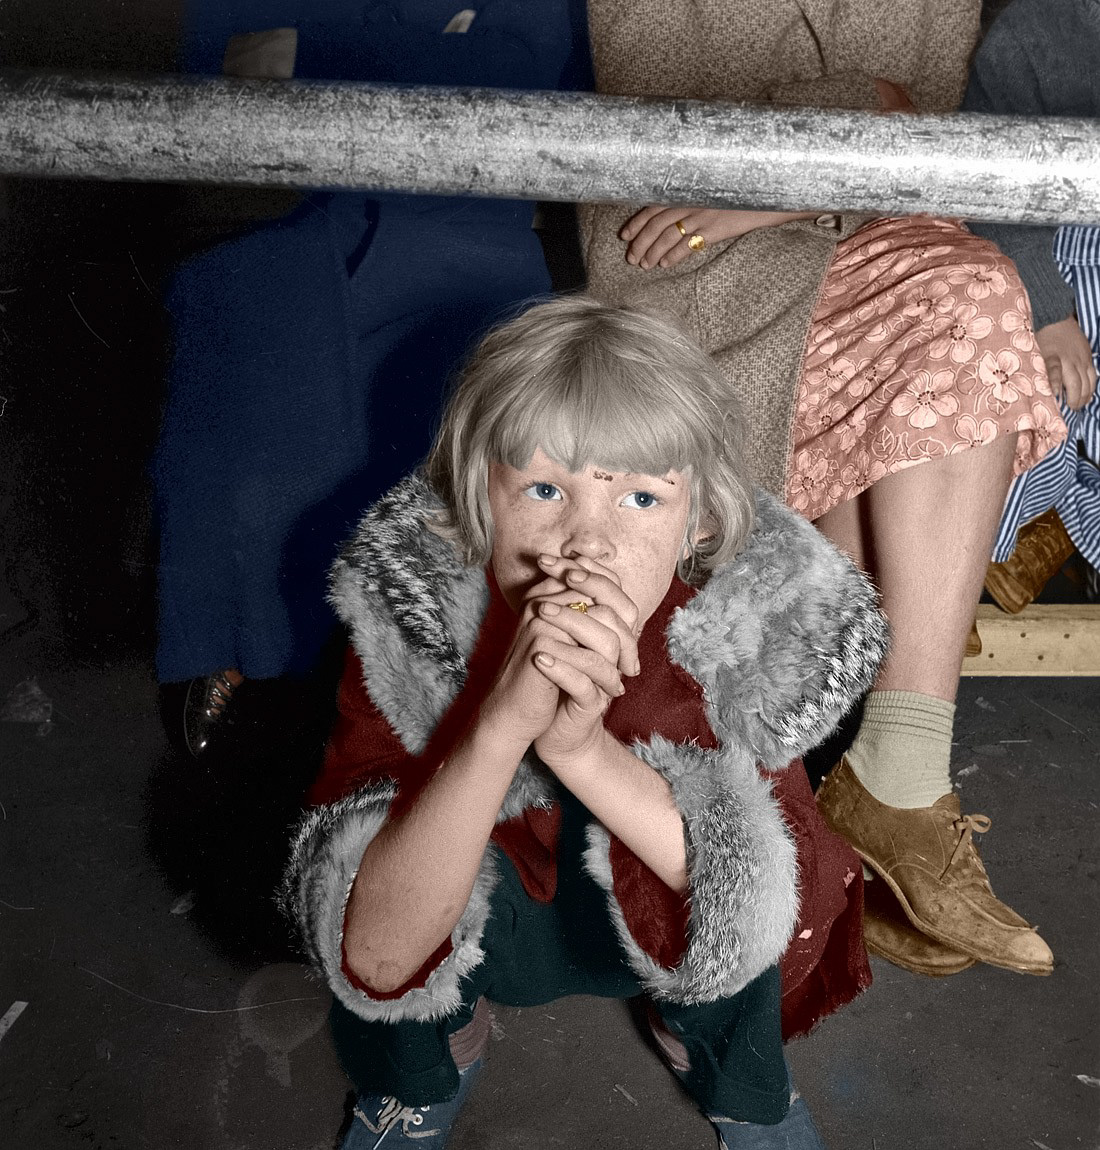 Colorized from Shorpy's files. November 1938. "Kern County, California. Cotton picker's child listening to speeches of organizer at strike meeting to raise wages from 75 cents to 90 cents a hundred pounds. Strike unsuccessful." Photo by Dorothea Lange. View full size.